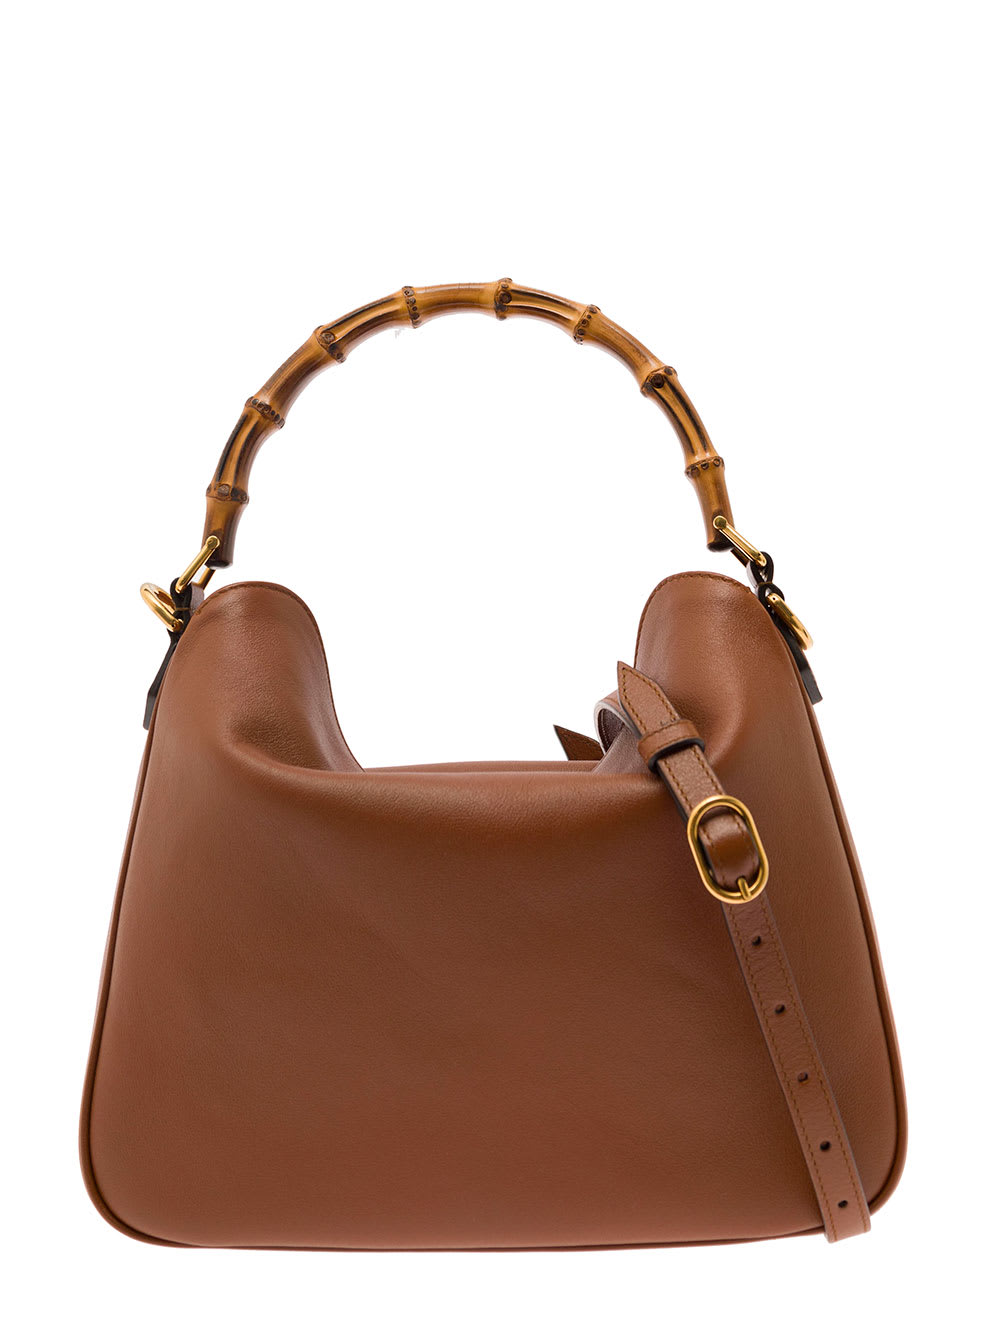 GUCCI MEDIUM GUCCI DIANA BROWN SHOULDER BAG WITH BAMBOO HANDLE AND DOUBLE G DETAIL IN LEATHER WOMAN